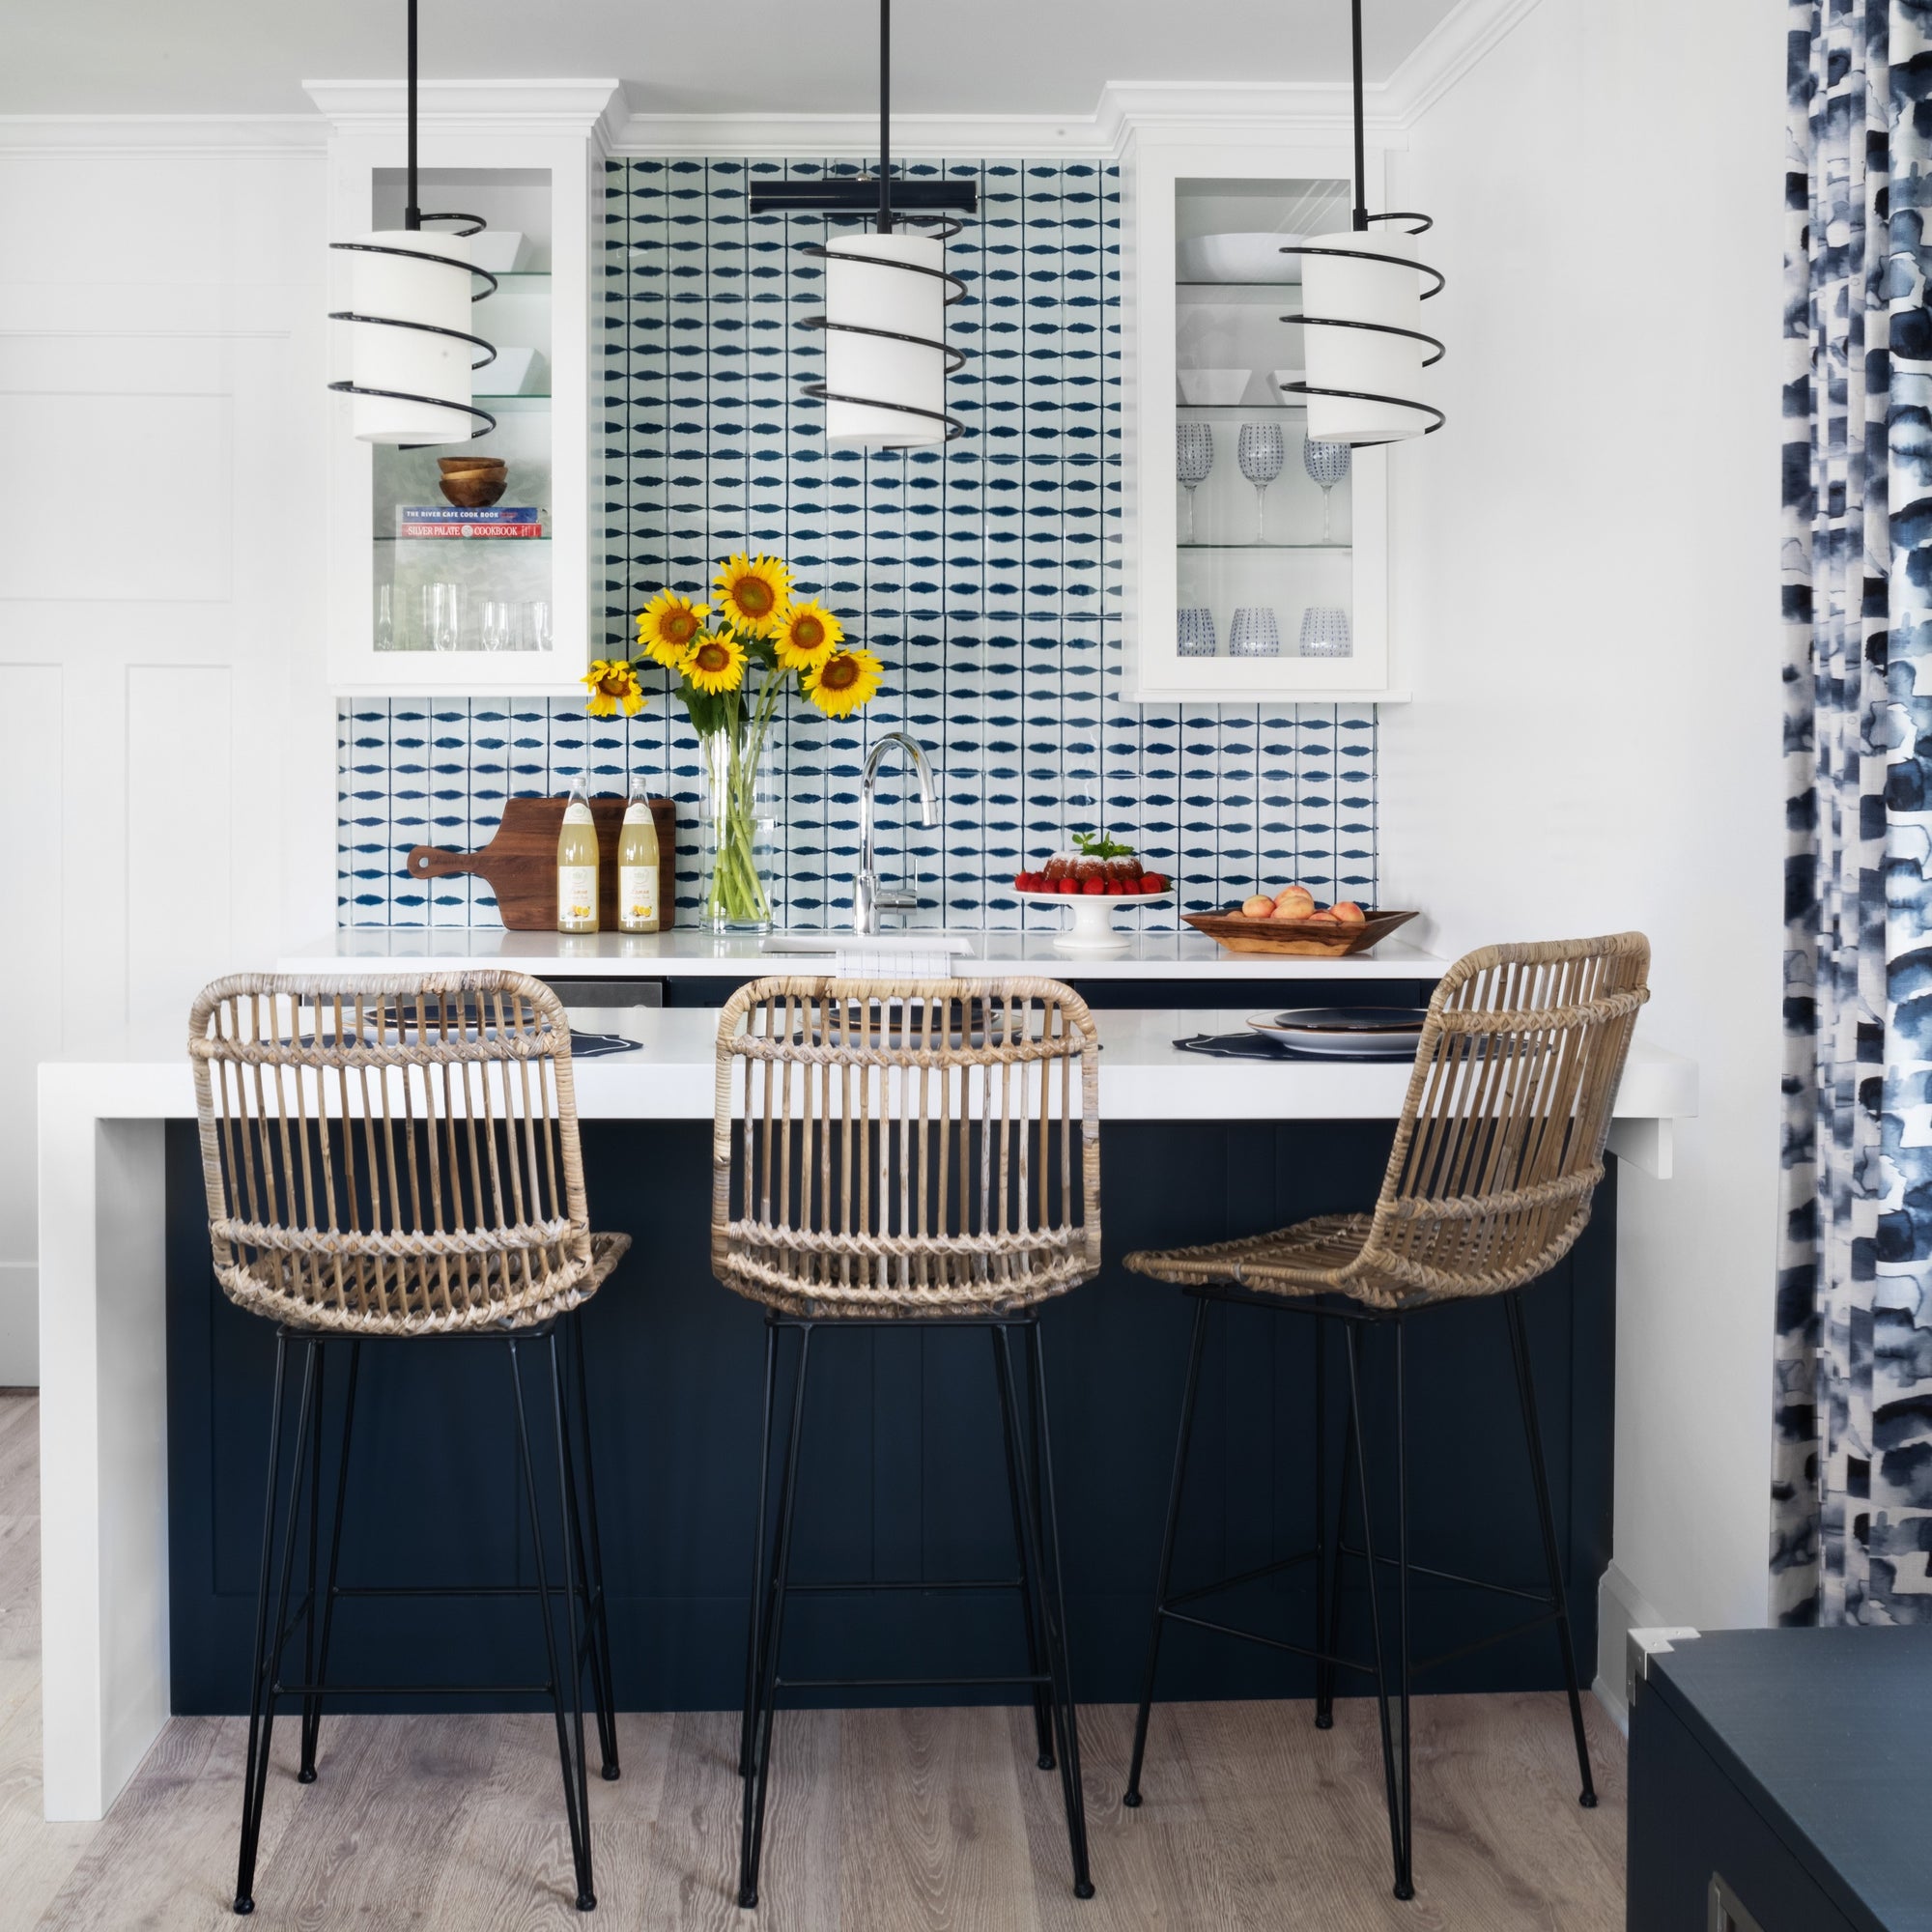 Kitchenette with blue and white backsplash tile and contemporary pendant lights. Guest cottage designed by Jamie Merida.